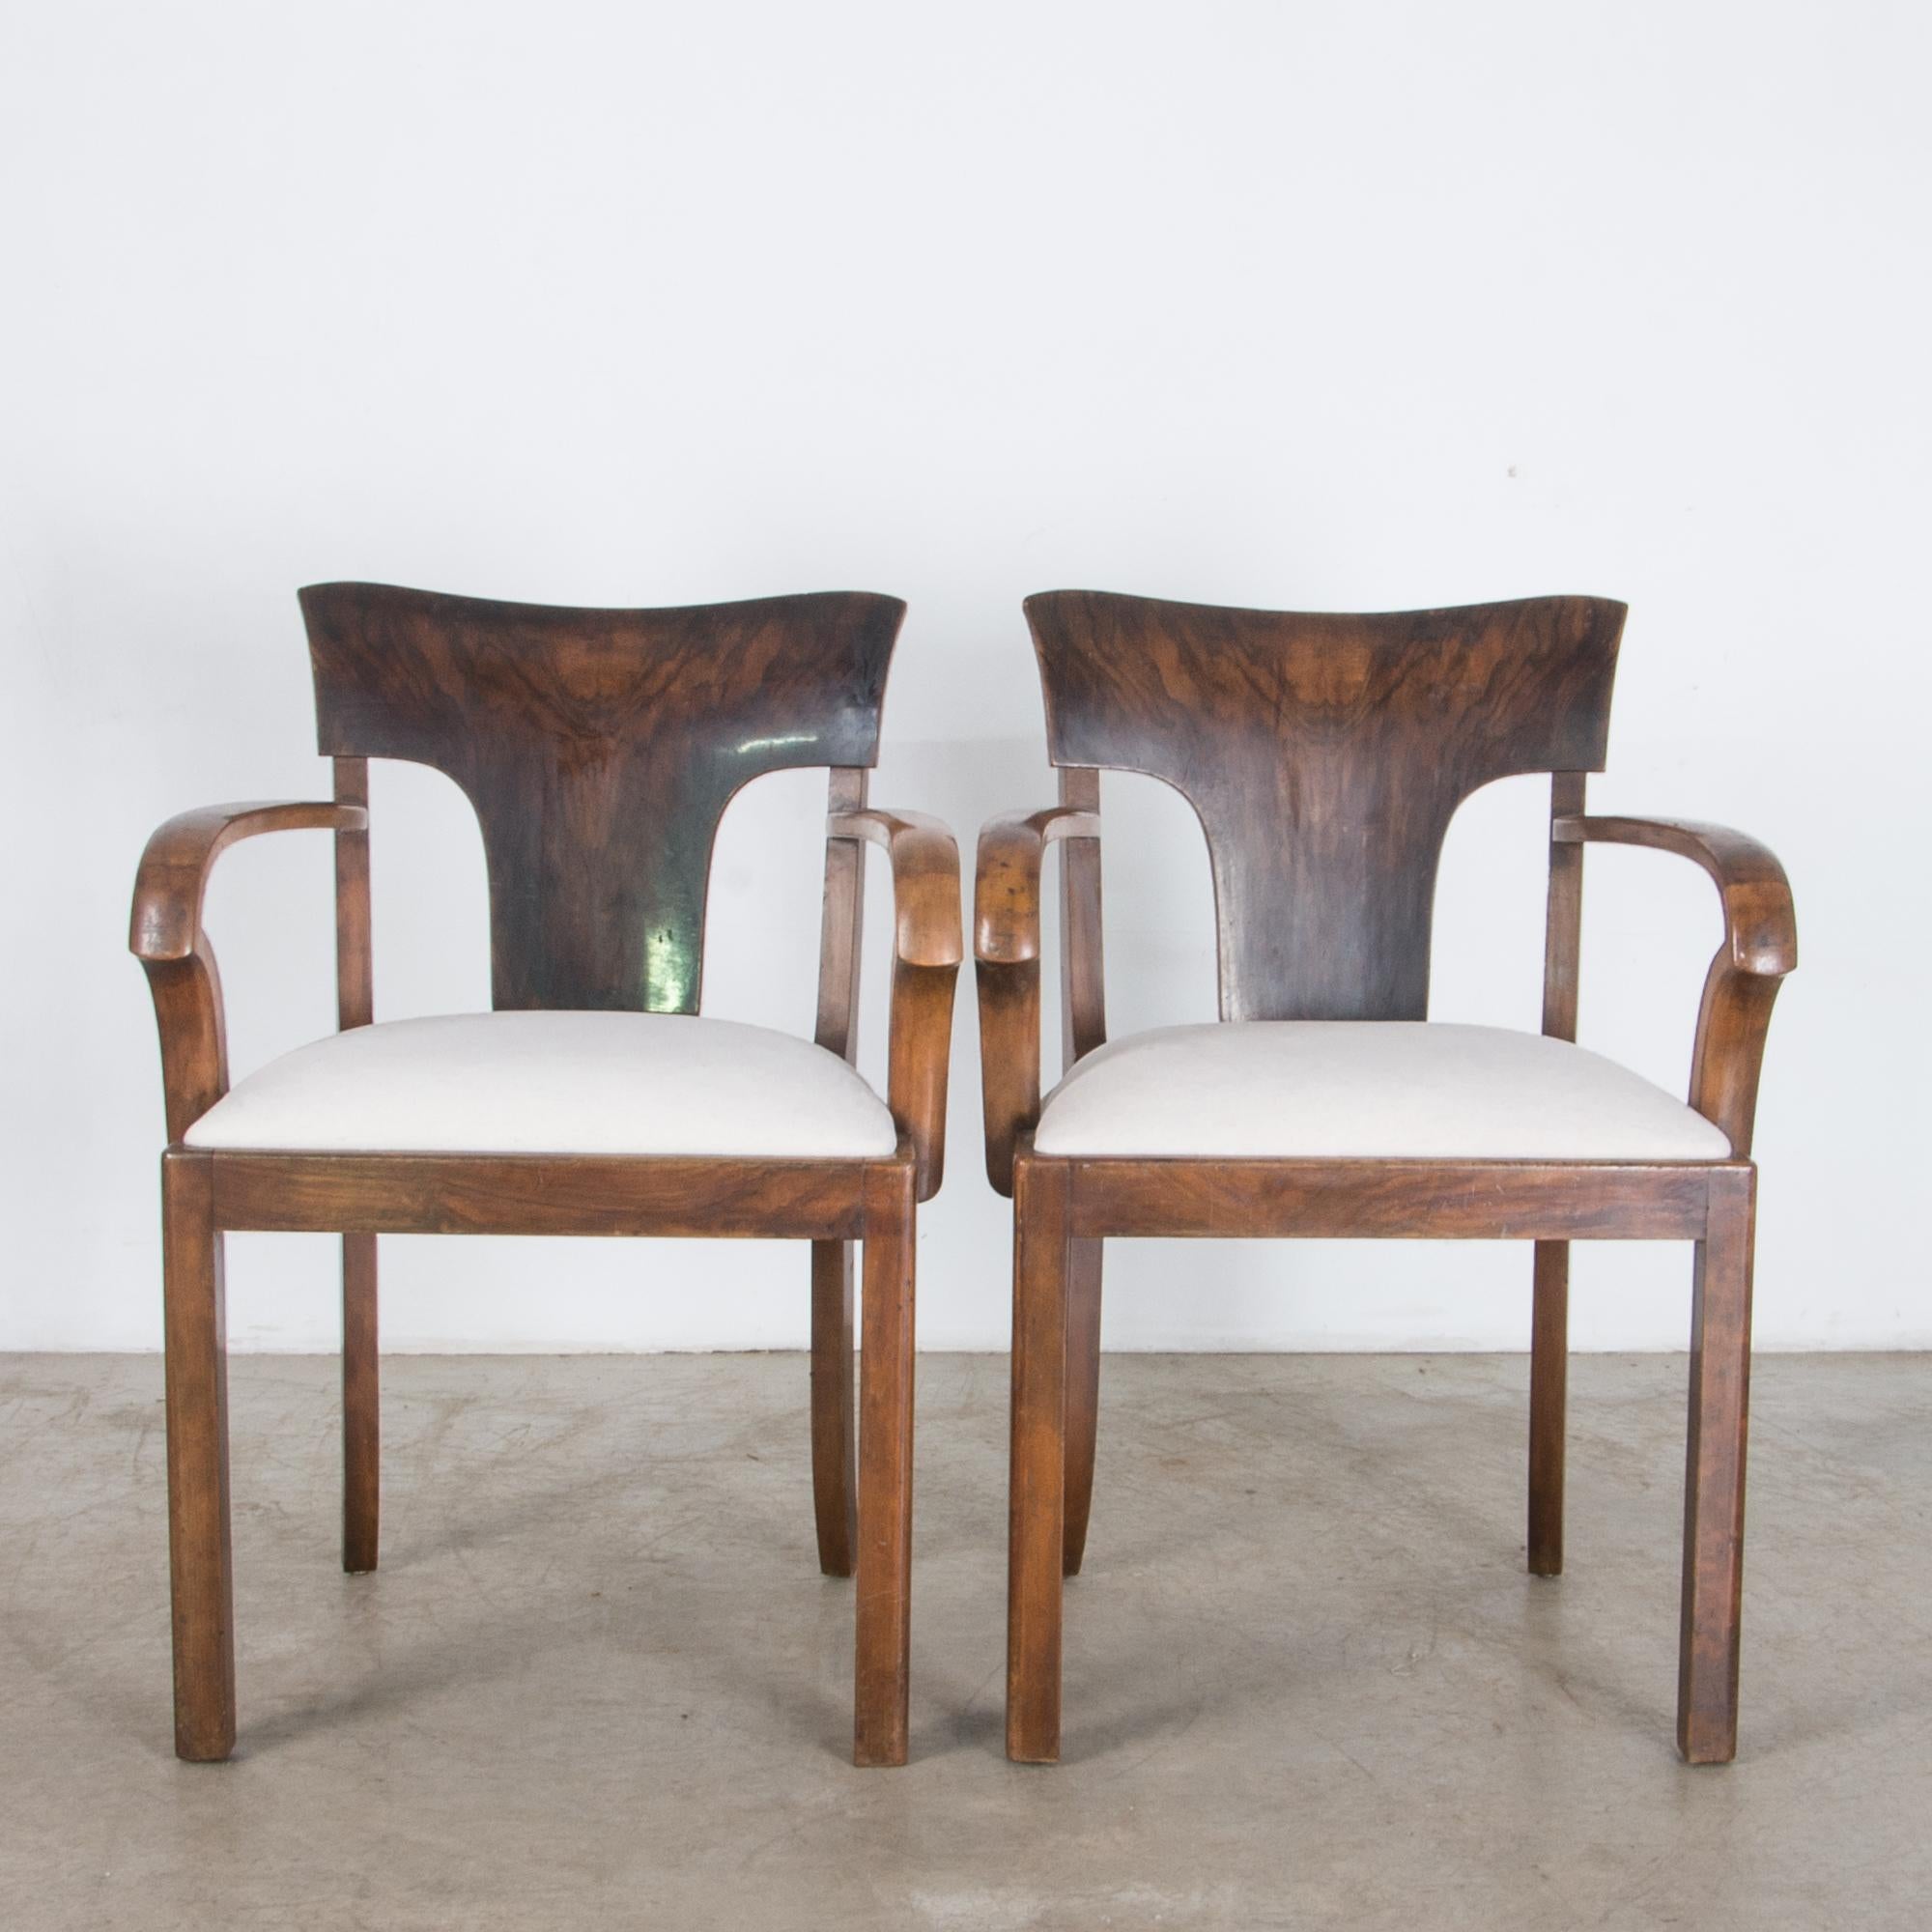 With a beautiful veneered seat back of European walnut, this pair of armchairs is composed with distinctive Art Deco style. Elegant bentwood arms and rounded shapes give a simple elegance, a reminder of luxury. A sleek and streamlined shaped suggest